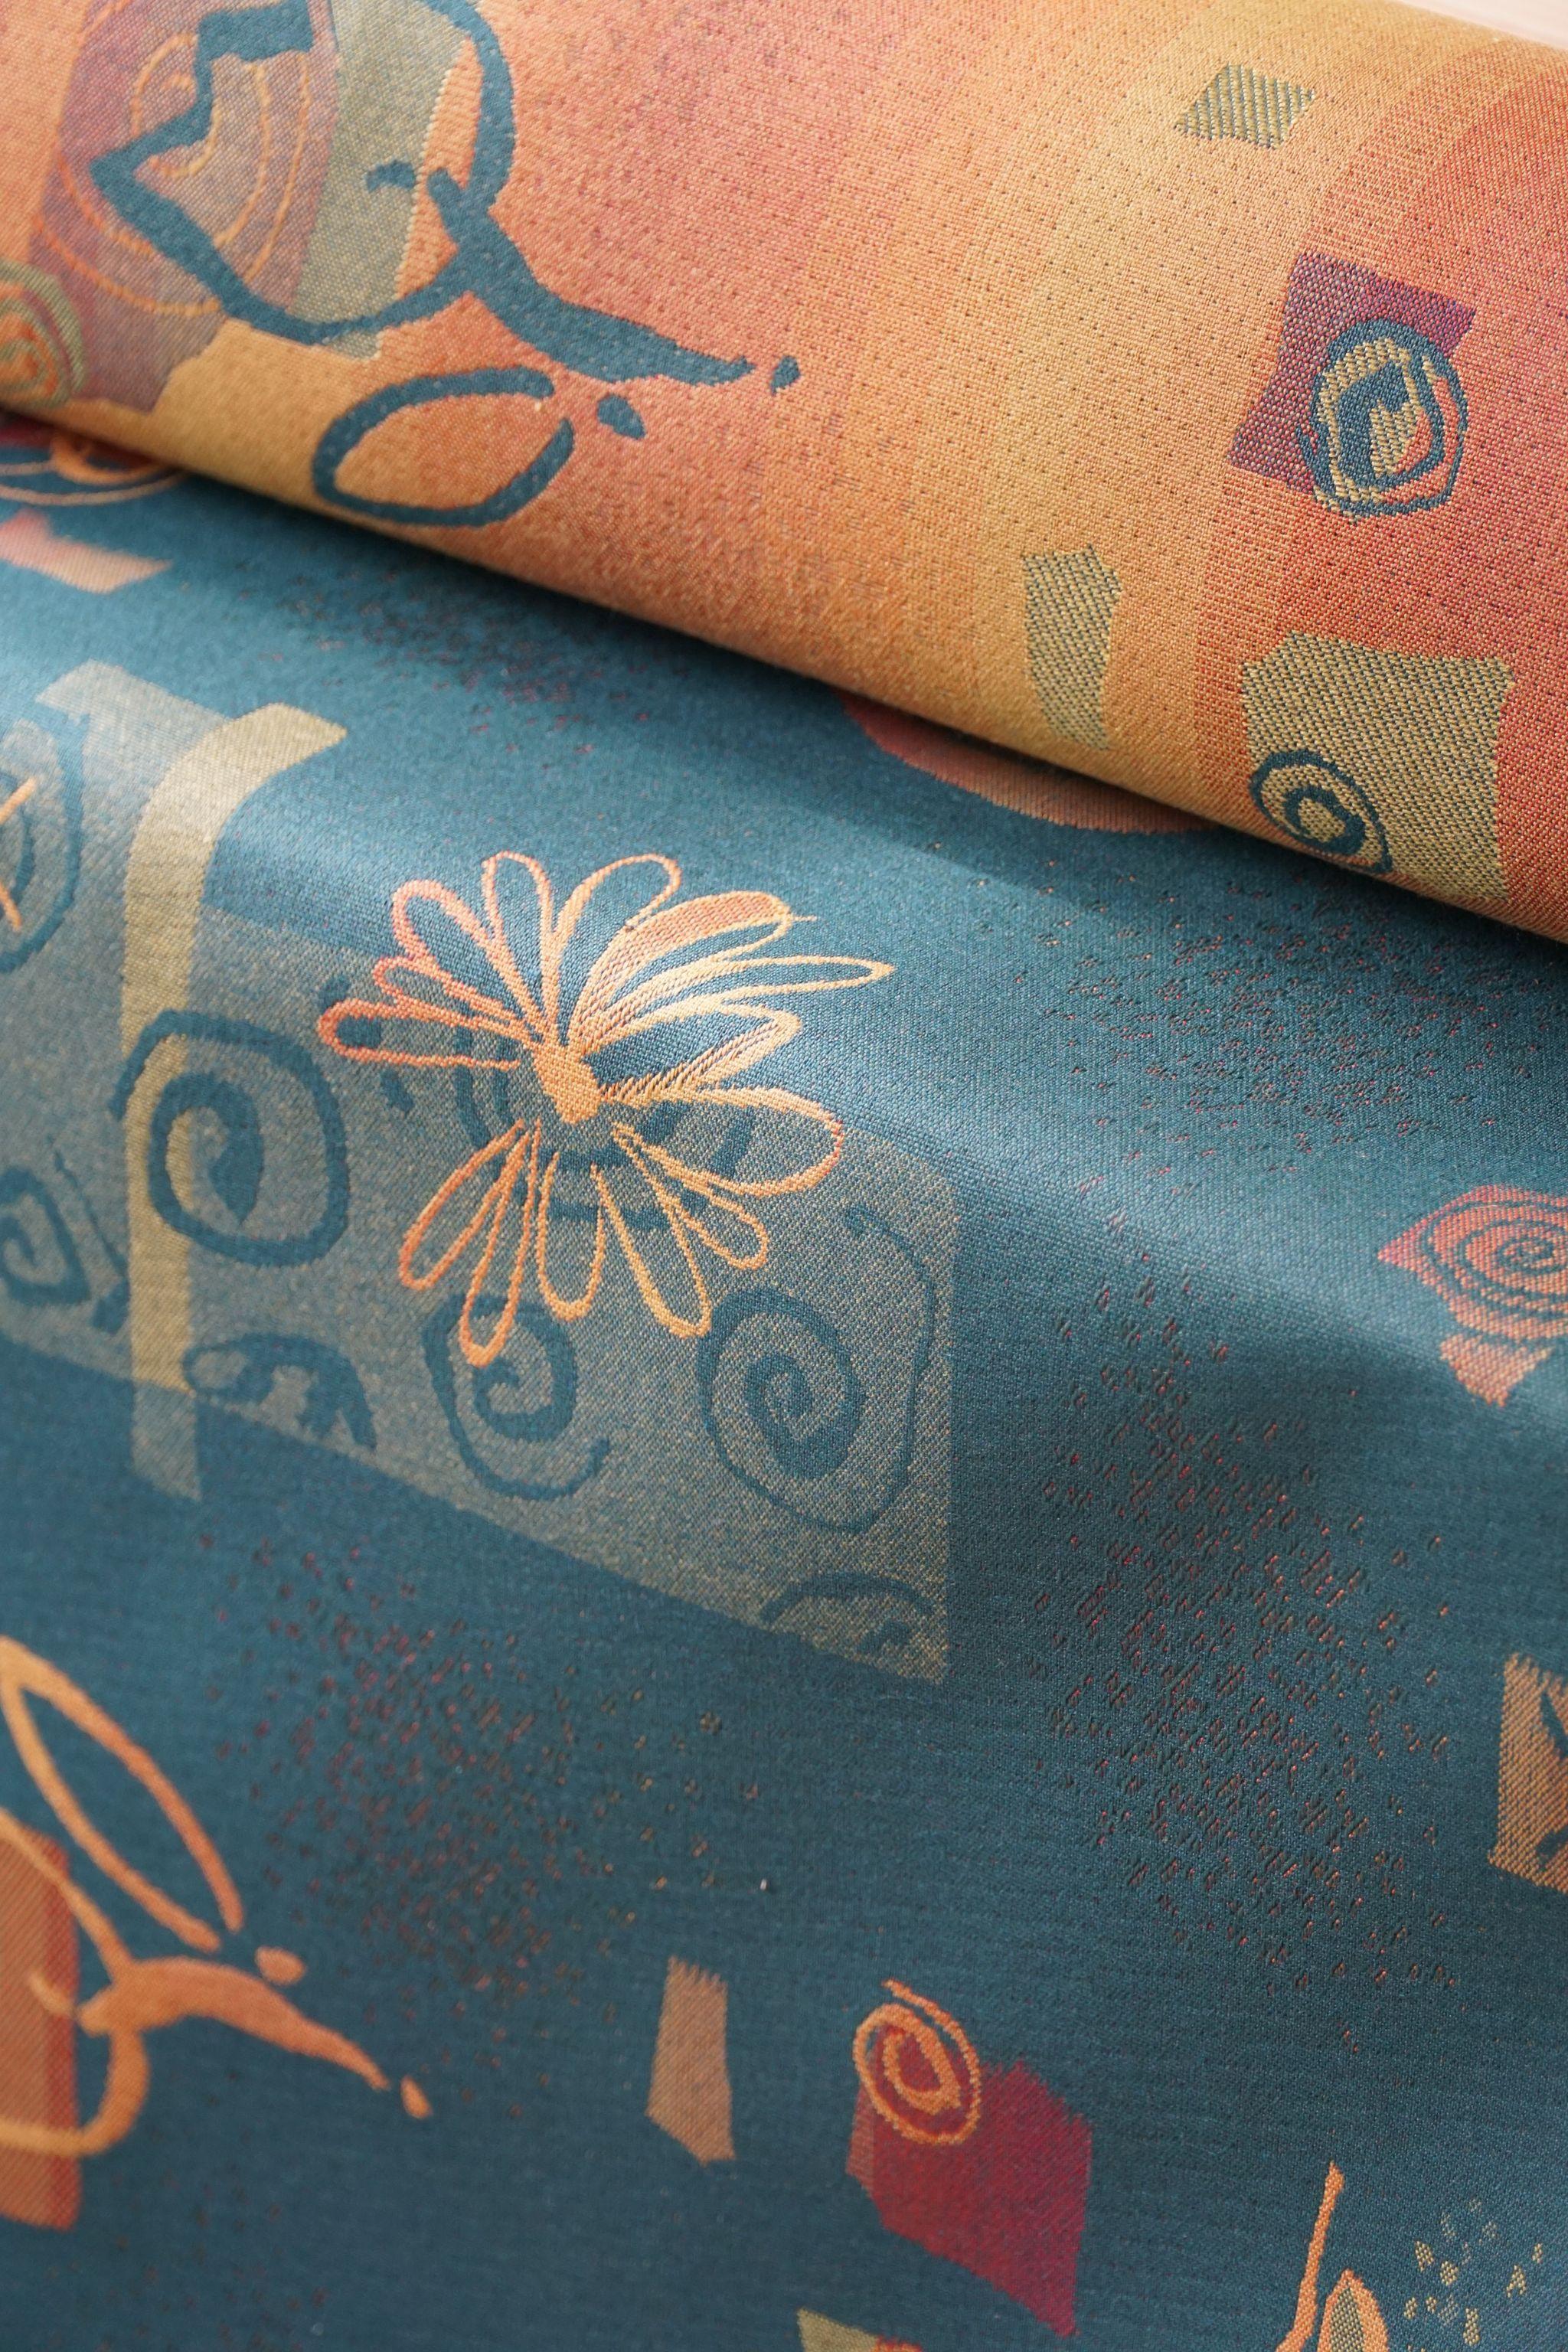 20th Century Vintage Gobelin Upholstery Fabric in Various Green & Orange Colors, Late 20th C For Sale